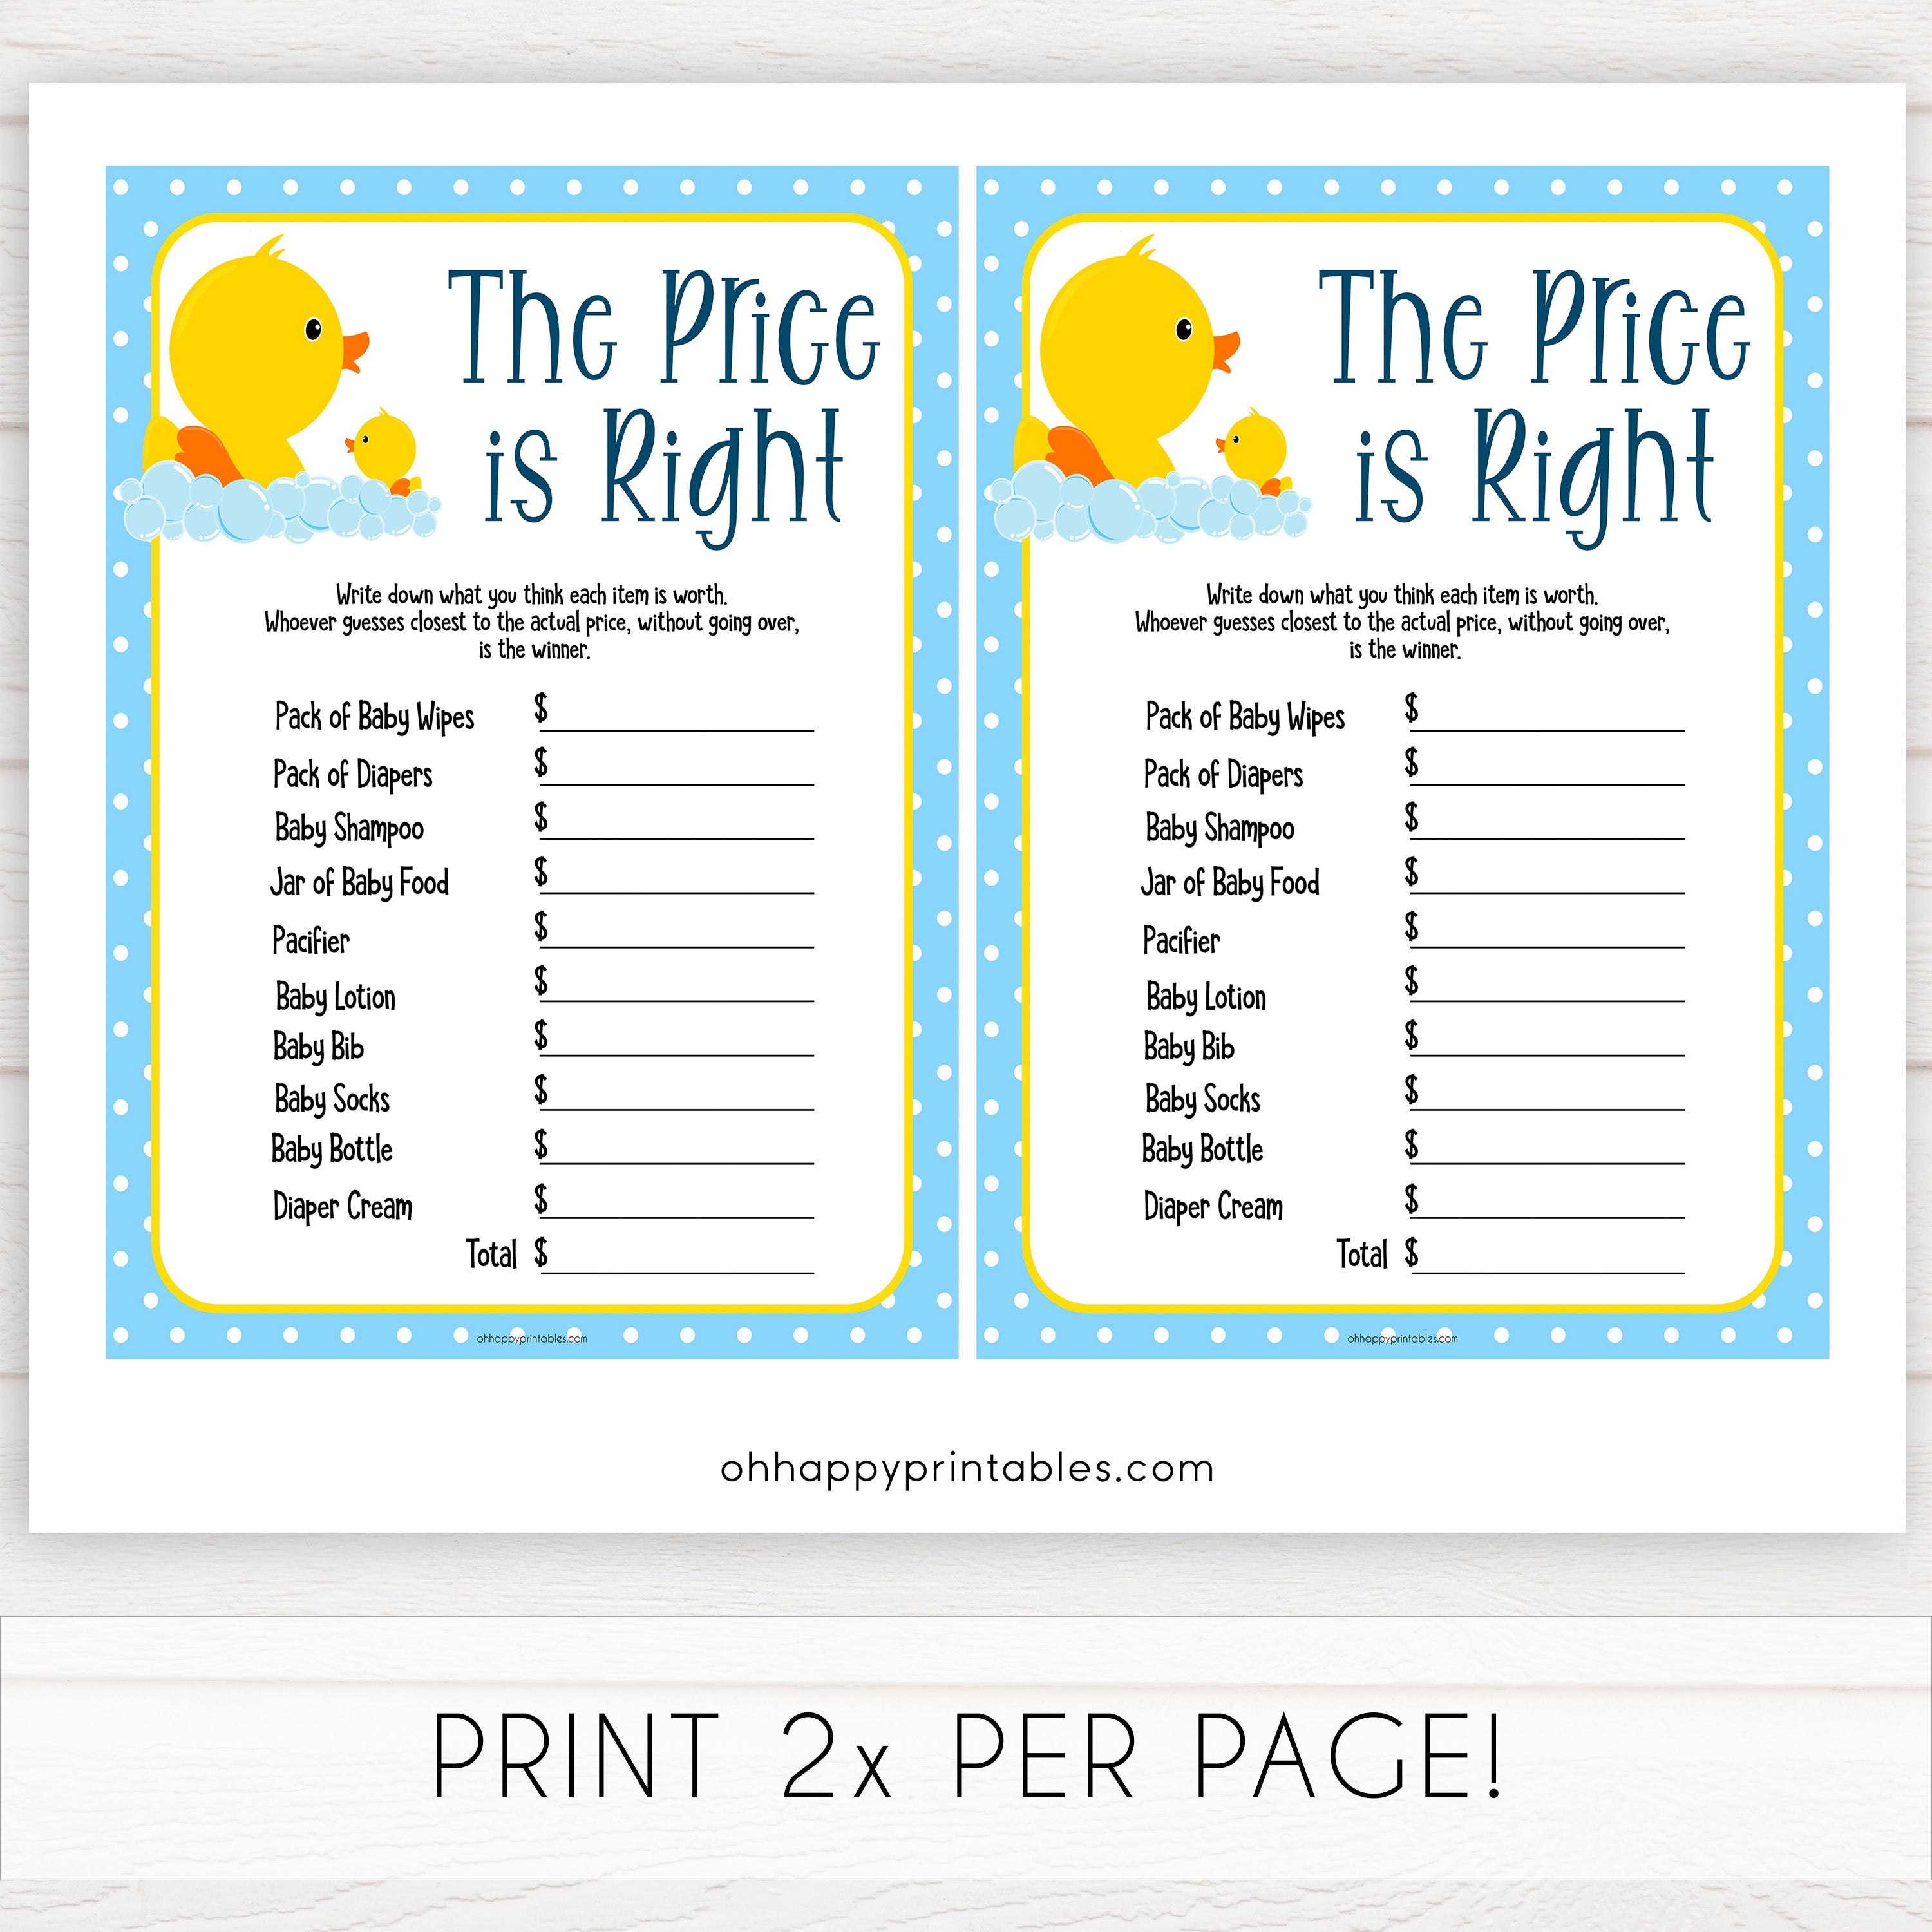 rubber ducky baby games, the price is right baby game, printable baby games, baby shower games, rubber ducky baby theme, fun baby games, popular baby games